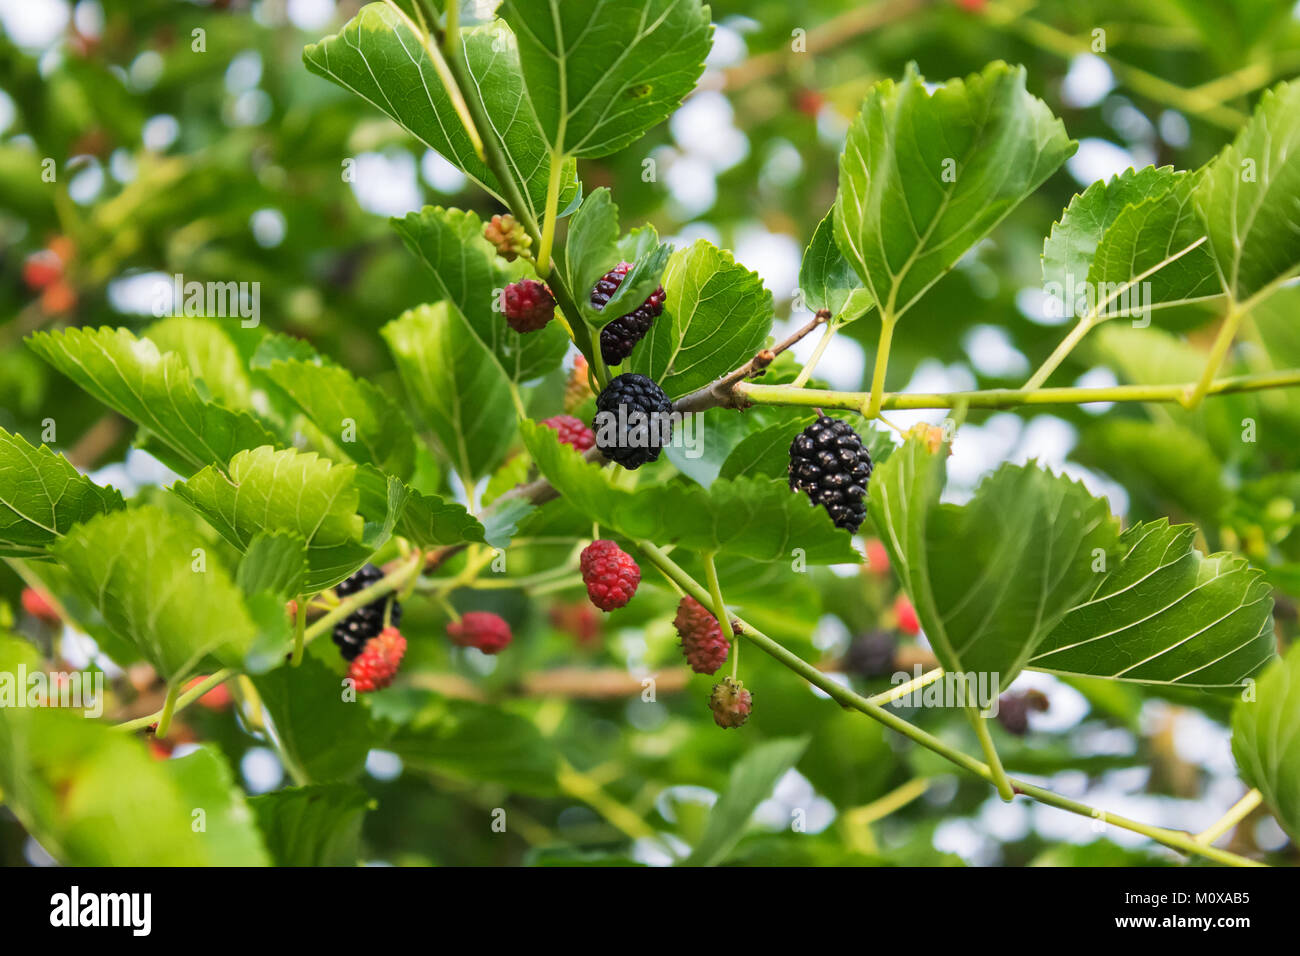 candid photos Mulberry branch with fruits and leaves Stock Photo